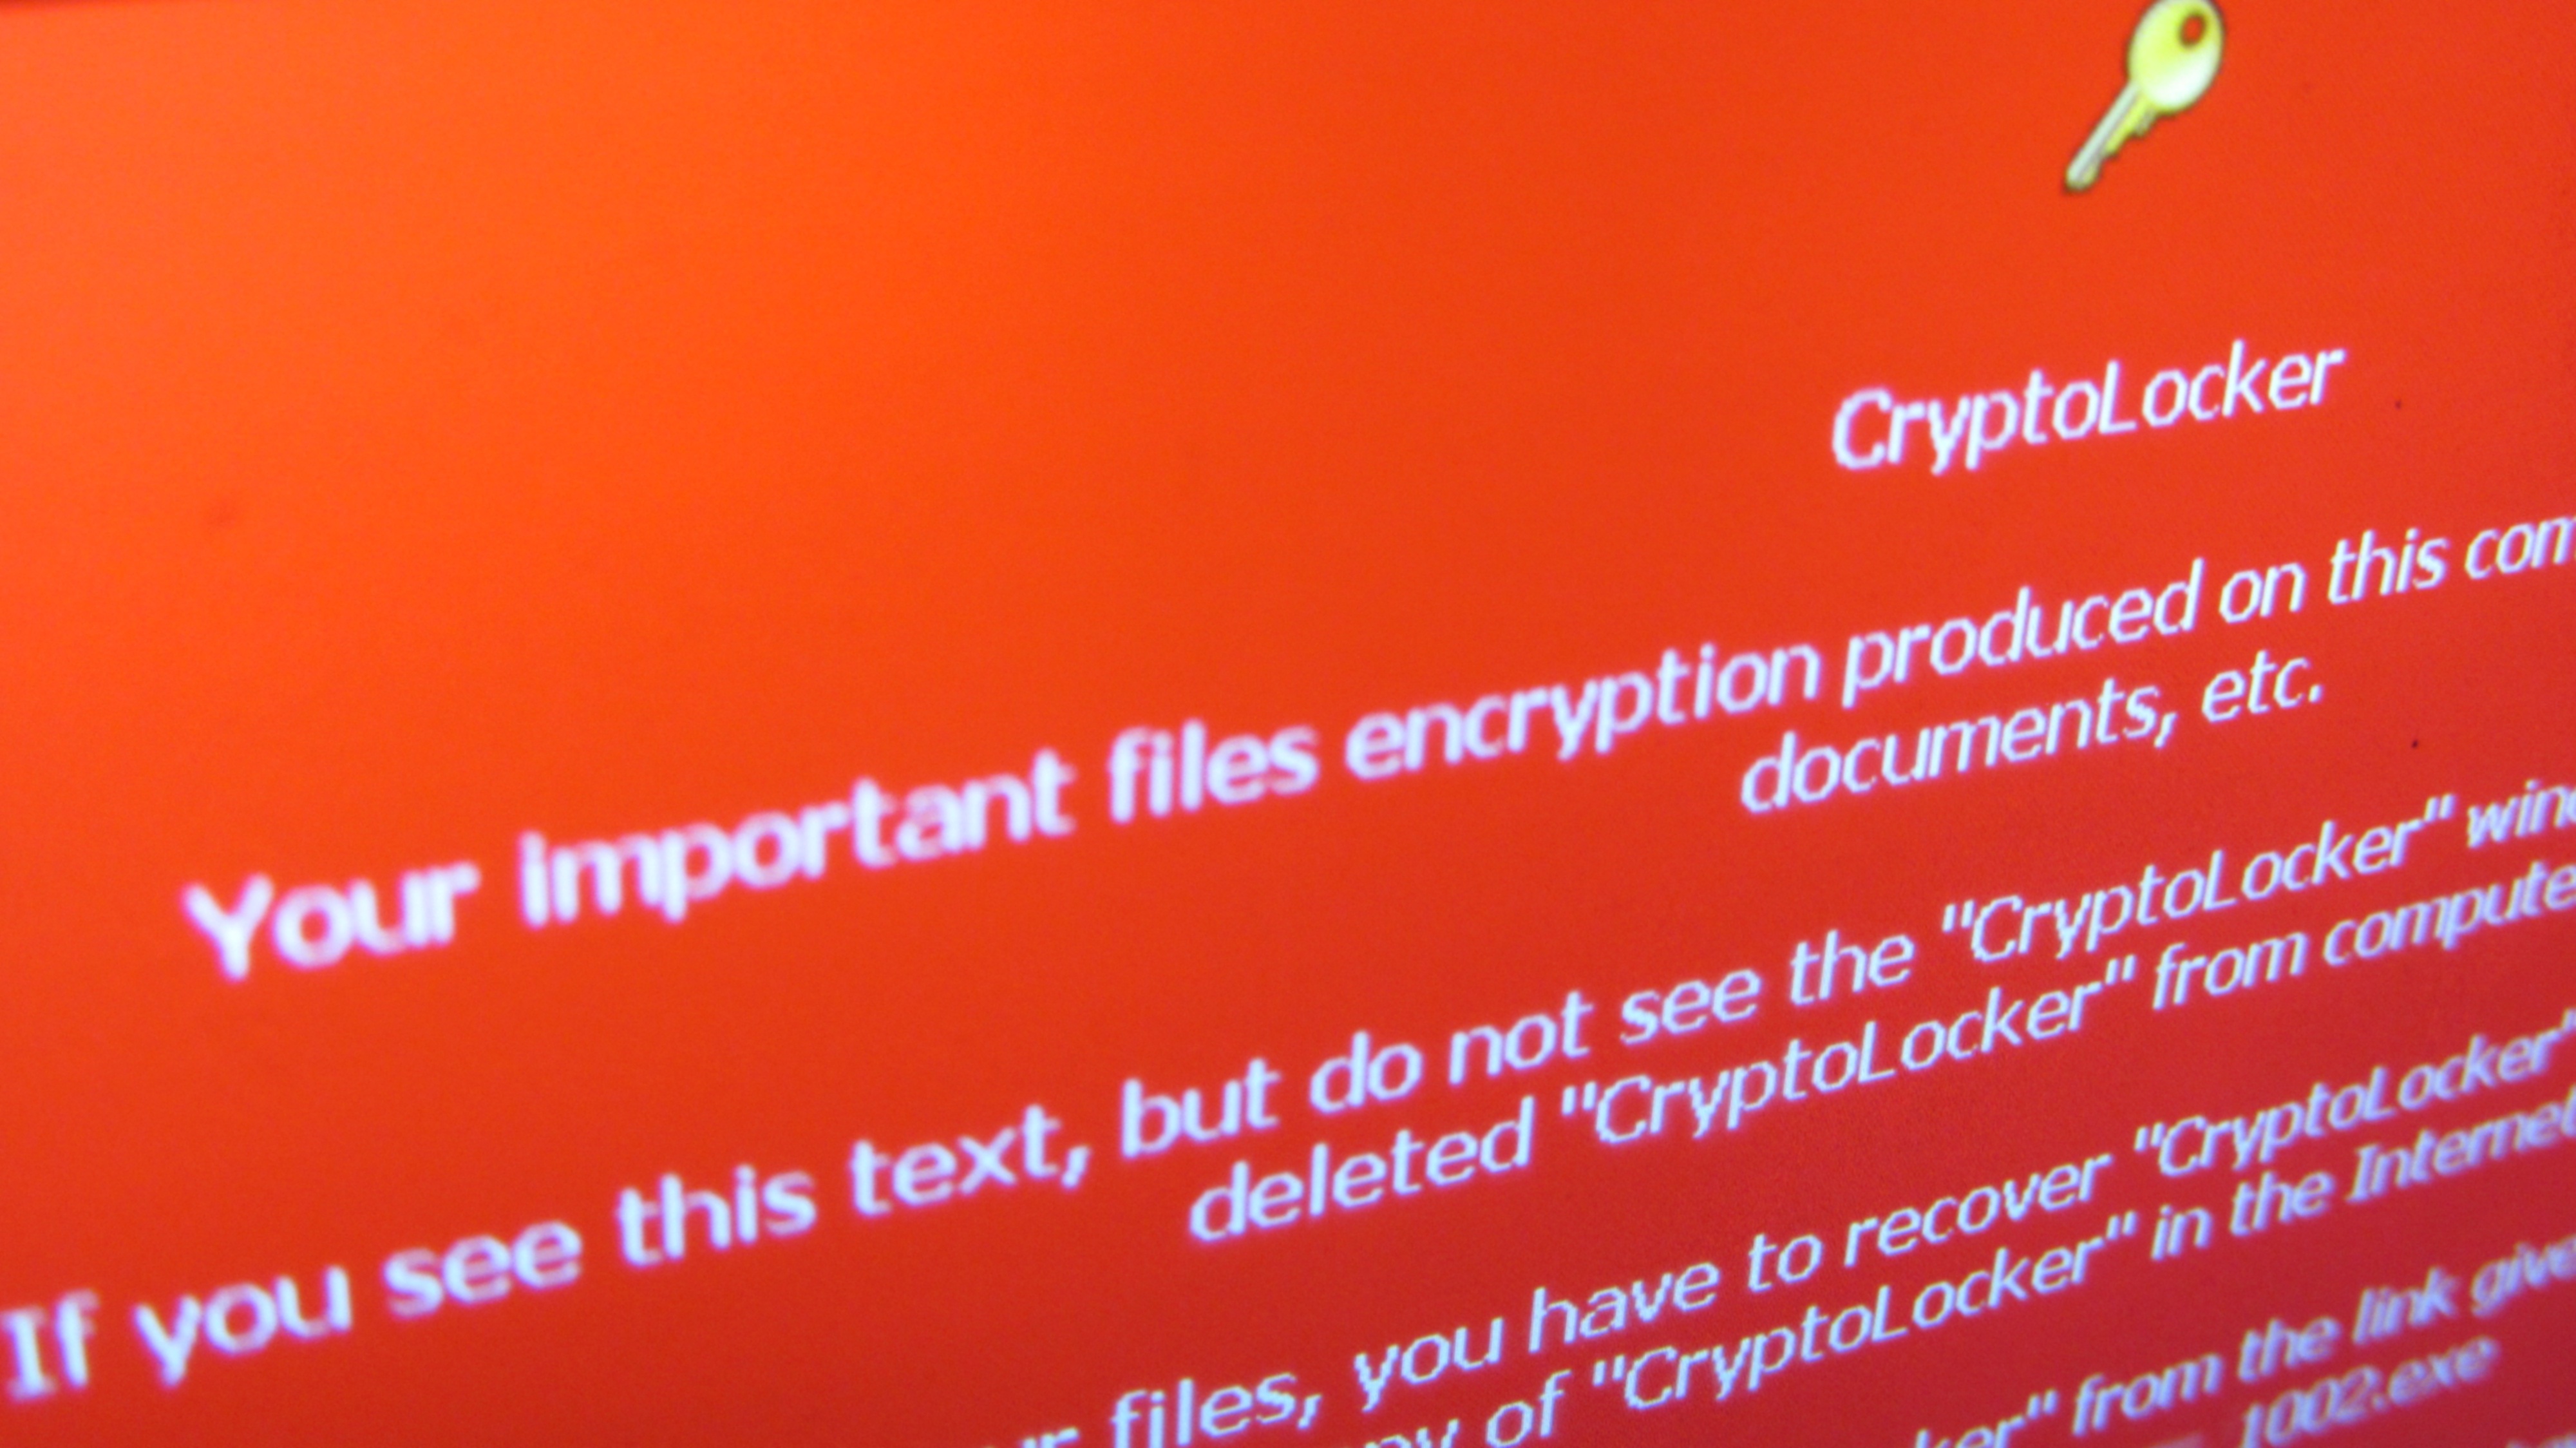 The Simple Way to Stop your Business from Being Extorted by Ransomware